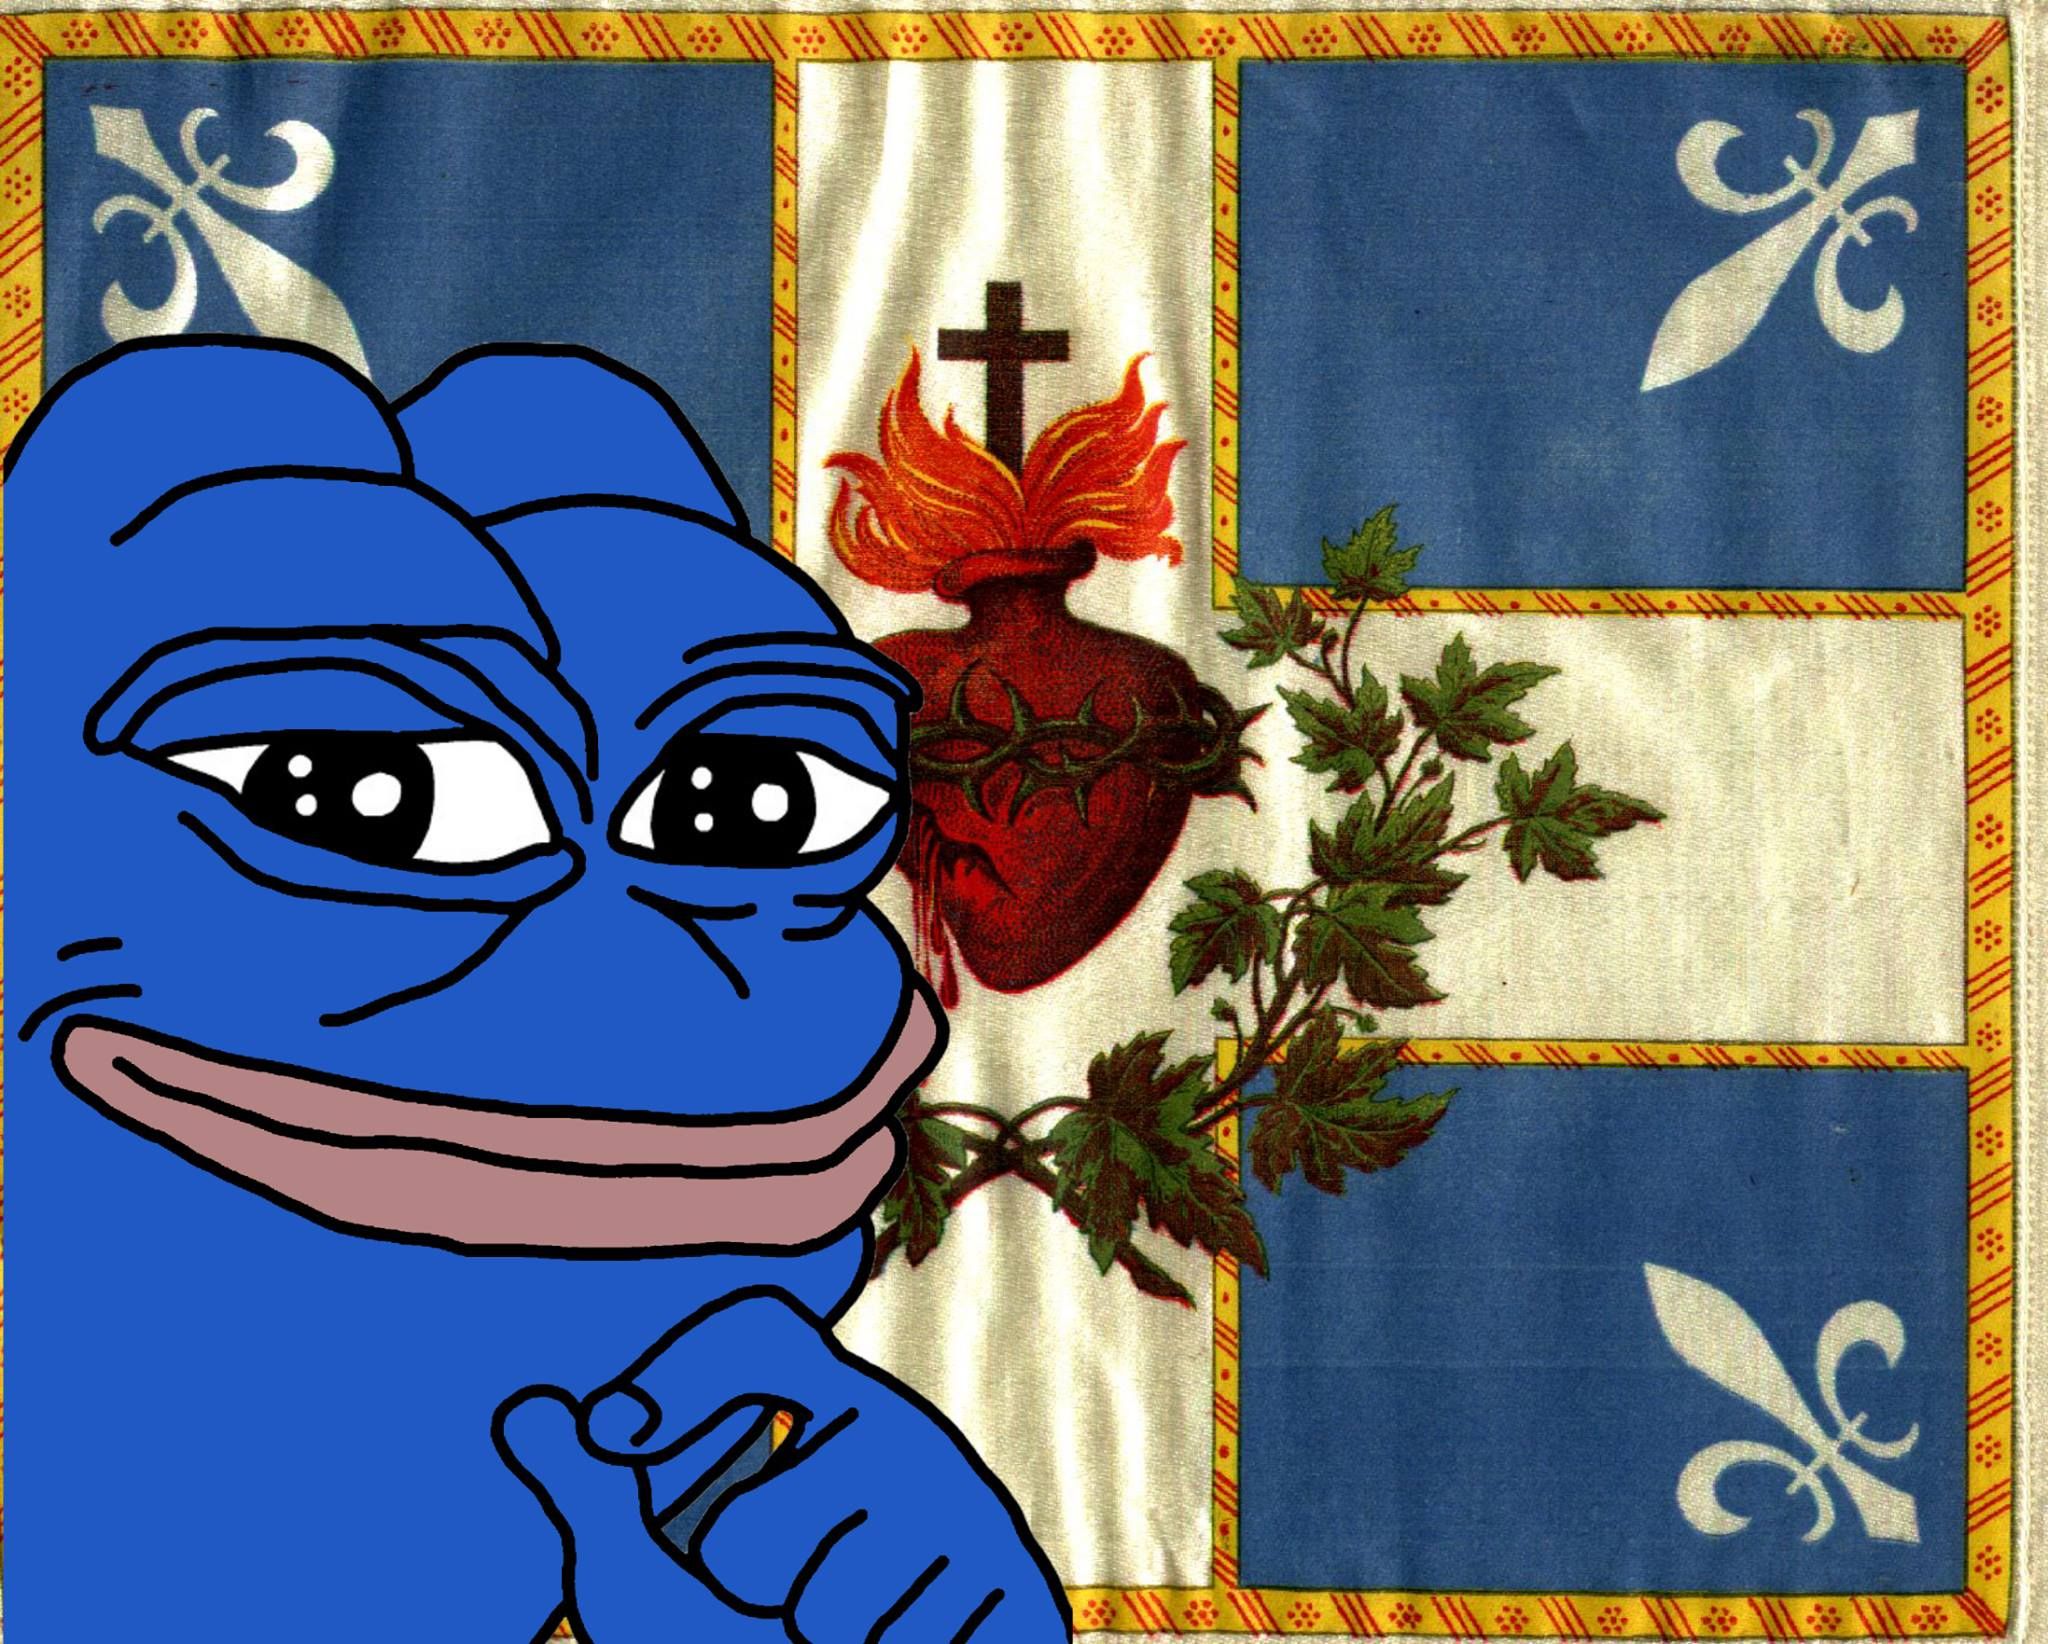 A blue Pepe in front of a Carillon Sacré Coeur.